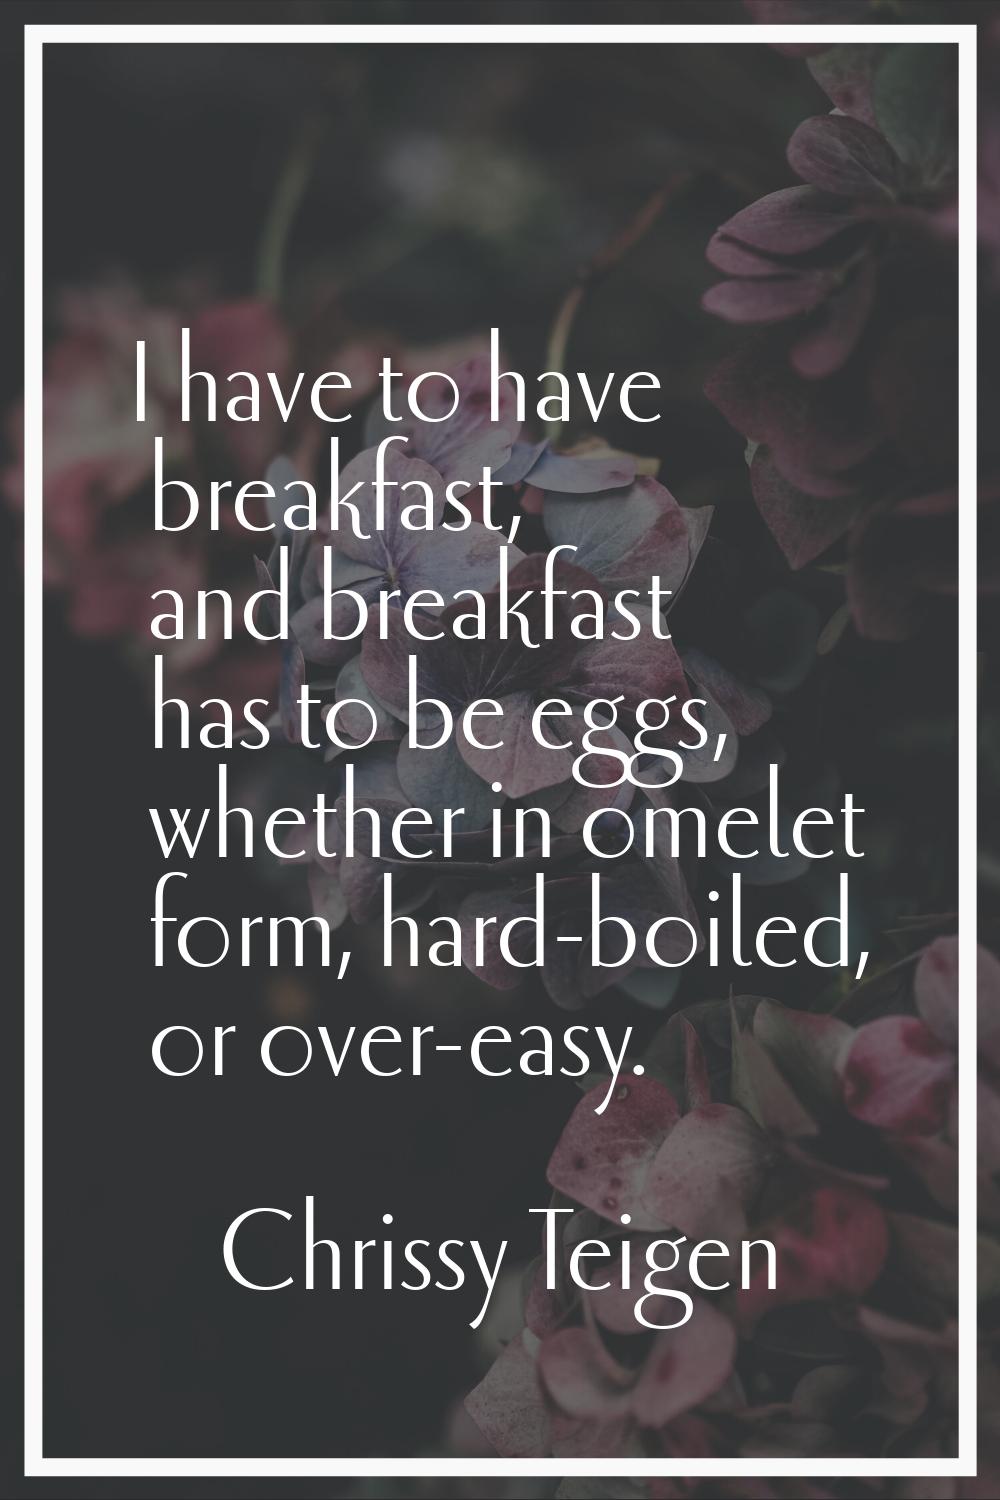 I have to have breakfast, and breakfast has to be eggs, whether in omelet form, hard-boiled, or ove